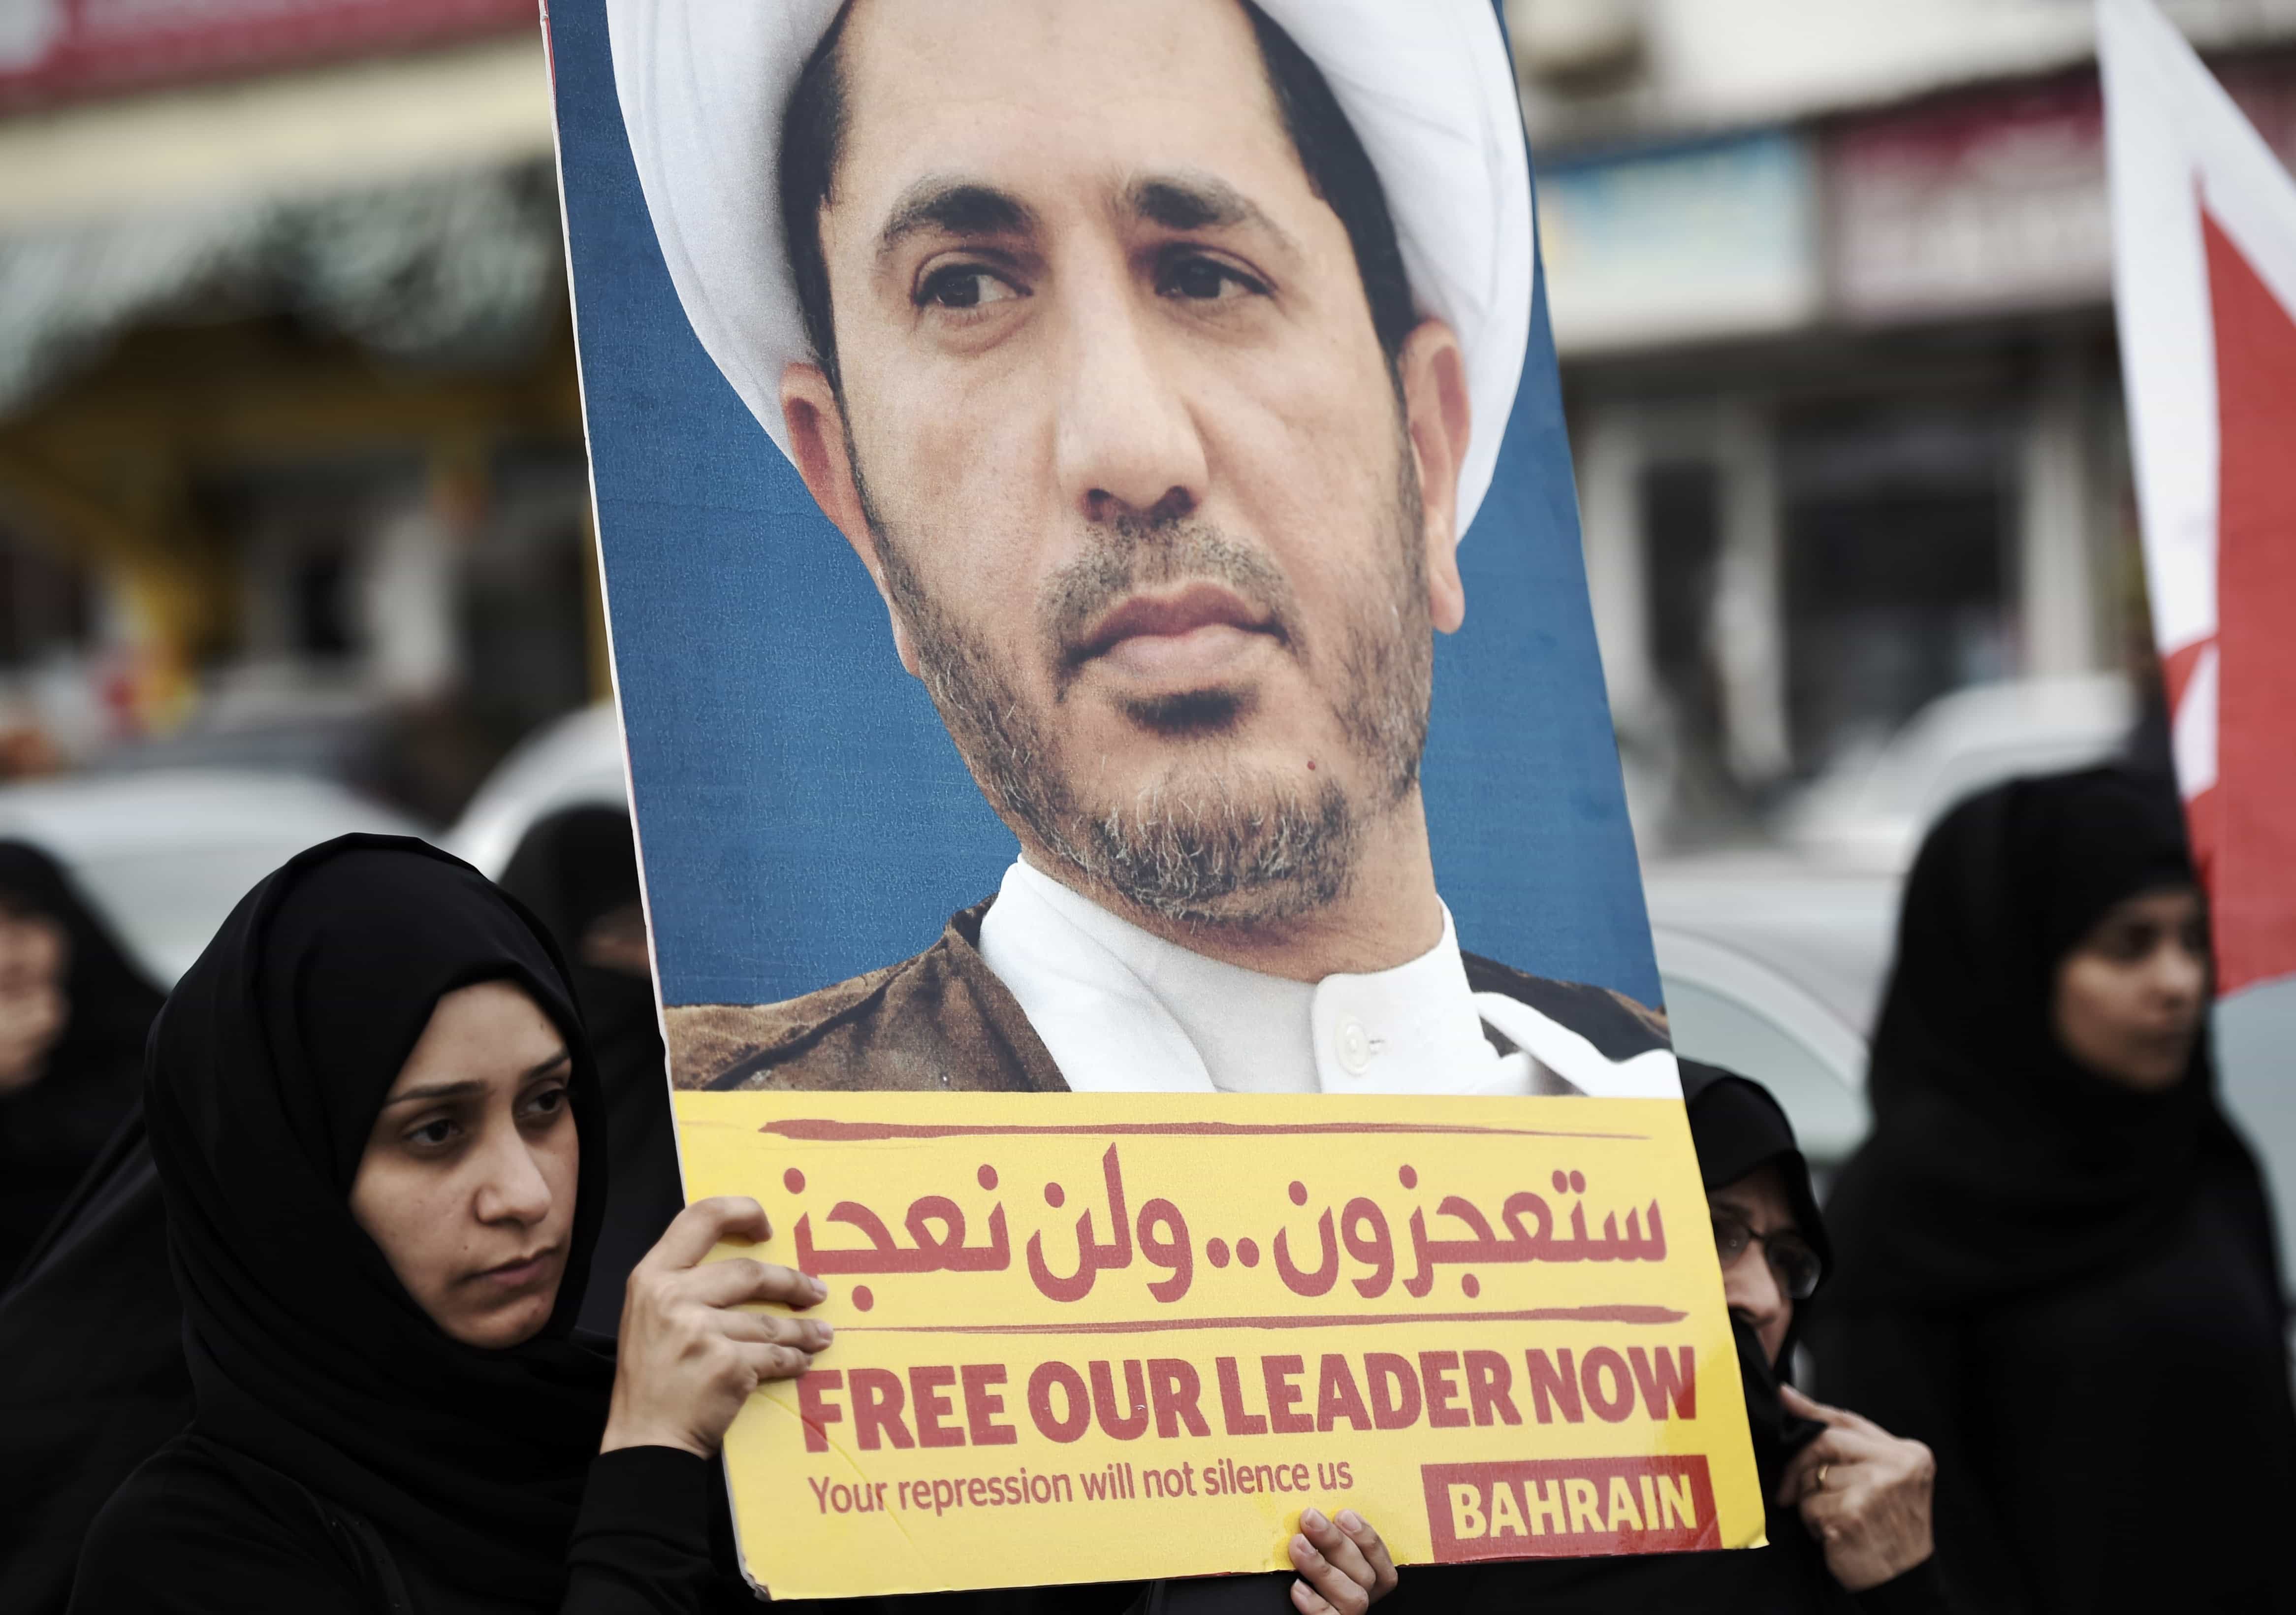 A Bahraini female protester holds a placard portraying Sheikh Ali Salman, head of the Shiite opposition movement Al-Wefaq, on March 24, 2015, during a demonstration against his arrest, in the village of Daih, west of Manama. Salman is behind bars for allegedly trying to overthrow the regime. His arrest on December 28, 2014, shortly after he was re-elected head of Bahrain's main opposition party Al-Wefaq, has sparked near-daily protests in Shiite villages., MOHAMMED AL-SHAIKH/AFP/Getty Images